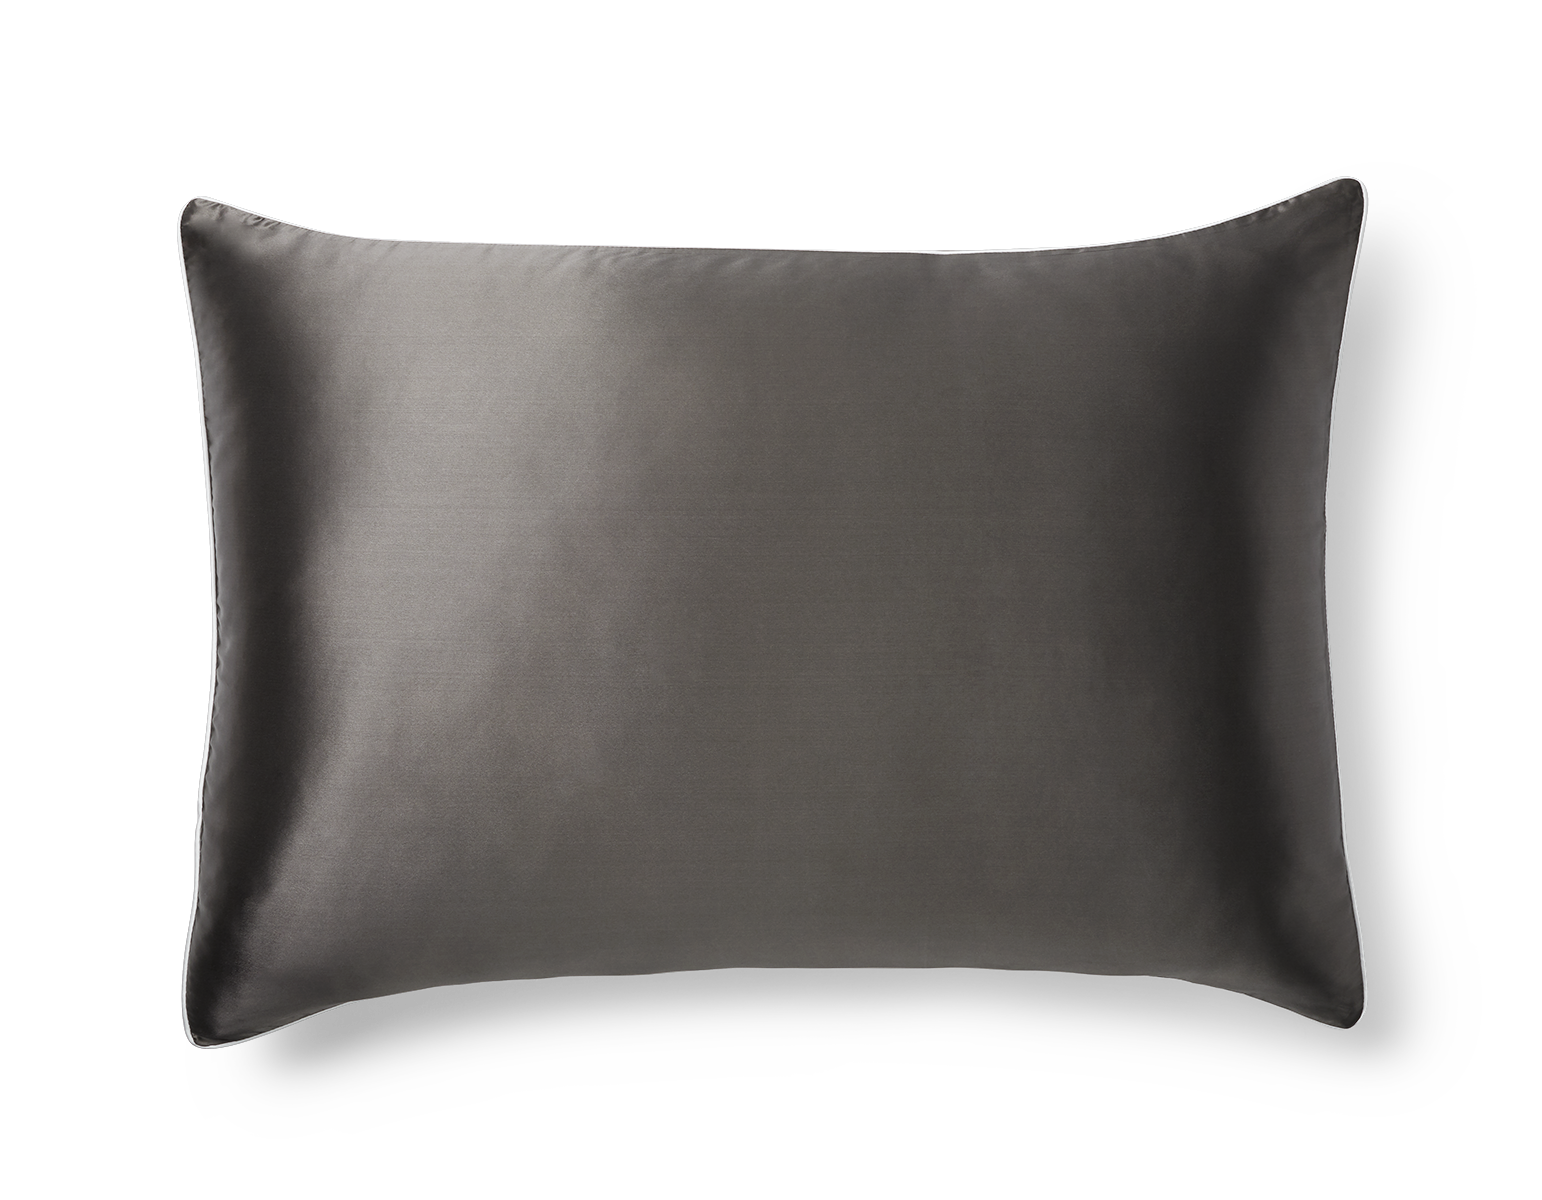 A KAILU silk pillowcase in charcoal with white piping, made with the highest-quality, OEKO-TEX-certified mulberry silk in 22 momme silk weight